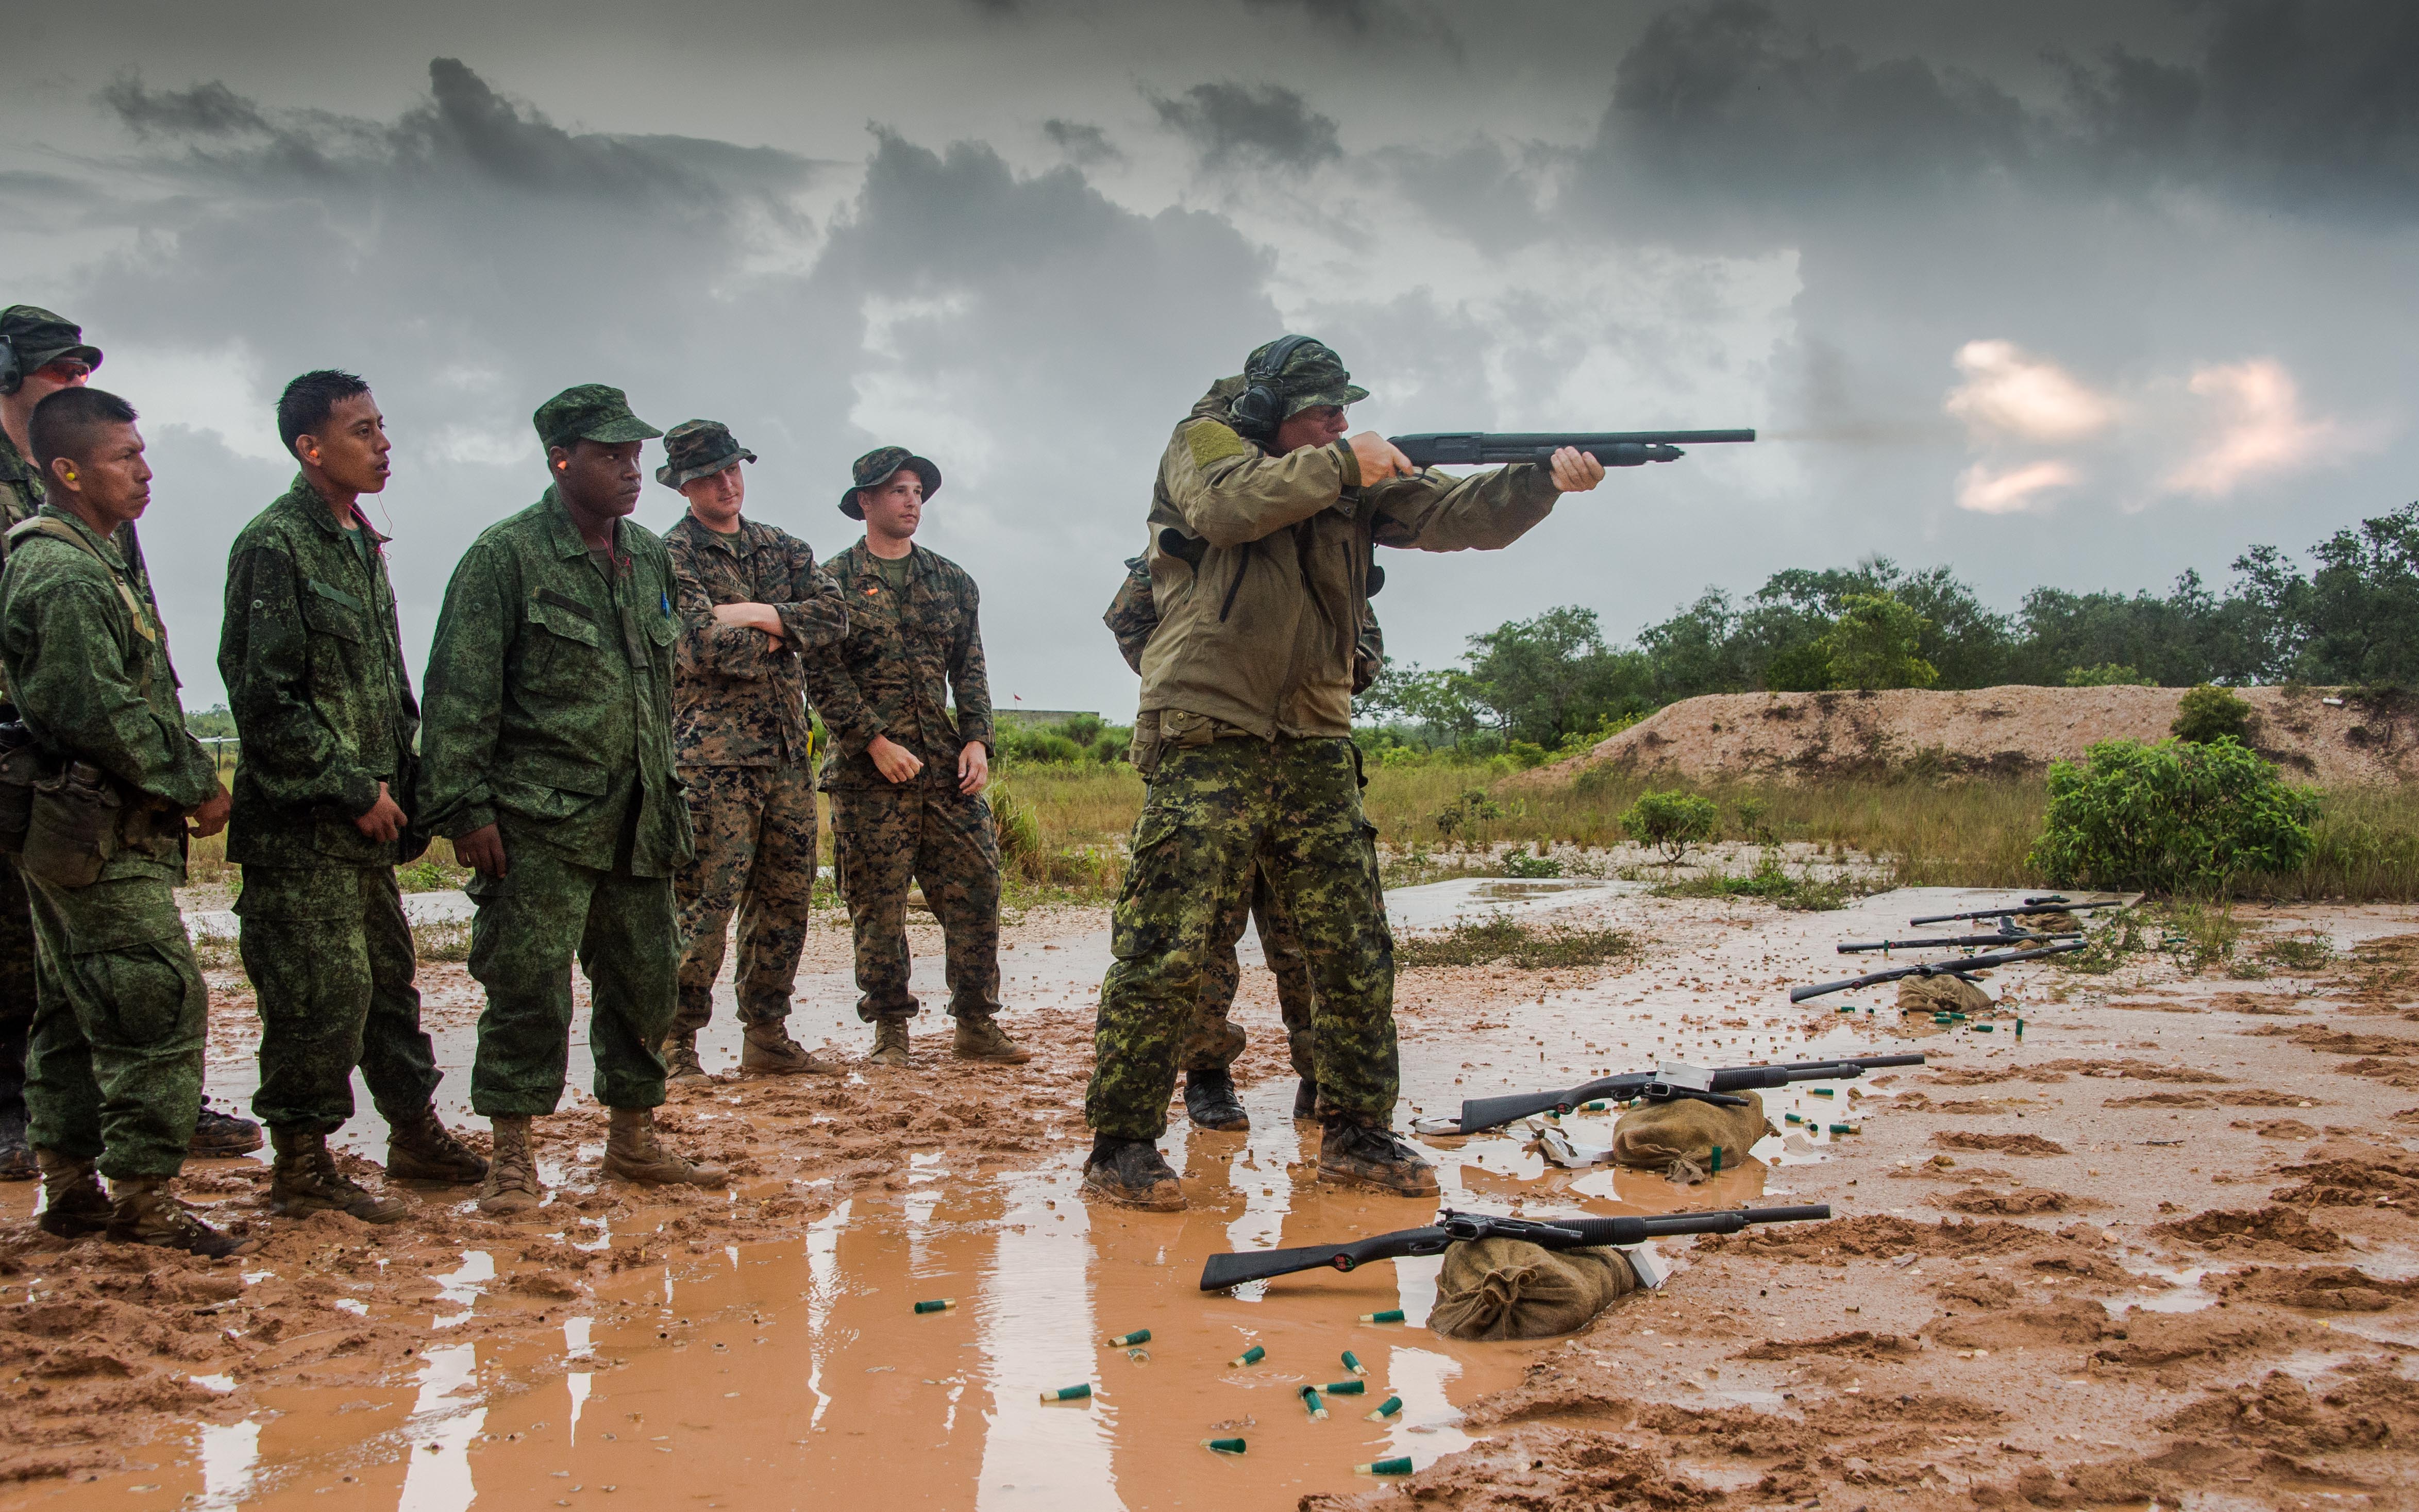 Belize. 18 June 2015 - Warrant Officer Jocelyn Roy from the Royal 22e Regiment, provides a shotgun demonstration for the soldiers from the Belize Defence Force and members of the United States Marine Corps participating in marksmanship shotgun training during phase II of Exercise TRADEWINDS 15. (Photo: Sgt Yannick Bédard, Canadian Forces Combat Camera)